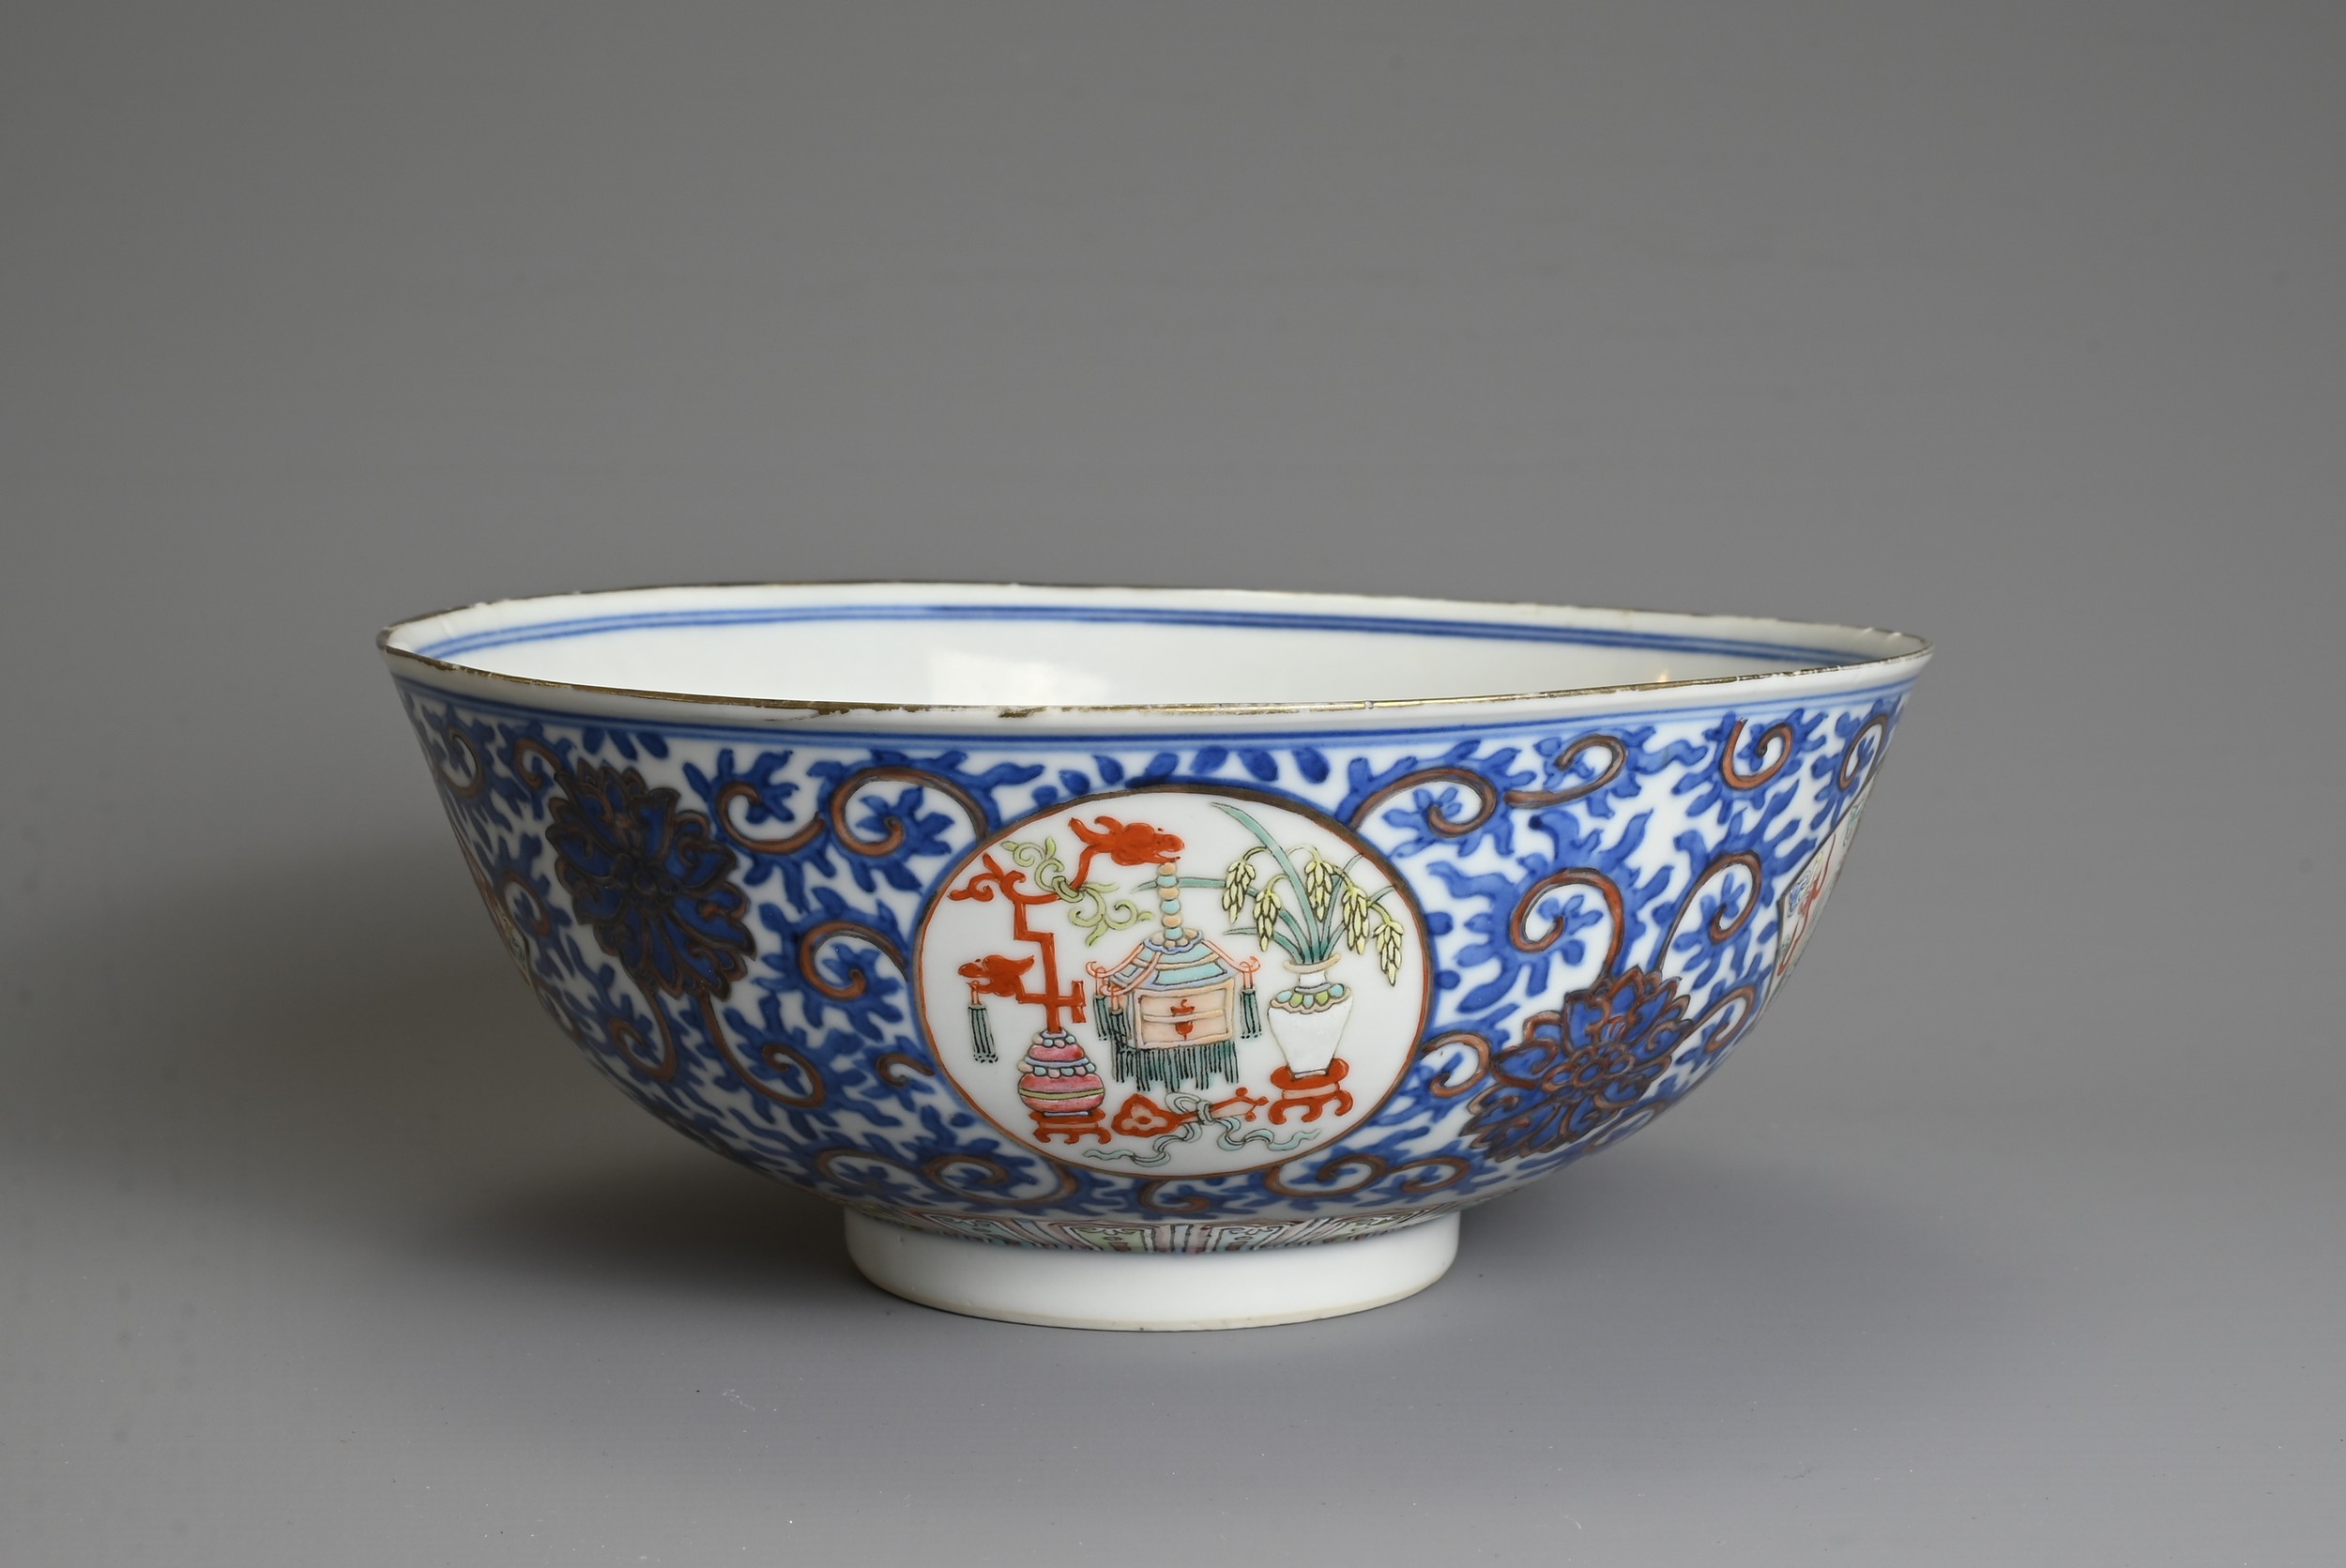 A CHINESE BLUE AND WHITE AND ENAMEL DECORATED PORCELAIN BOWL, LATE QING DYNASTY. Decorated with - Image 3 of 8